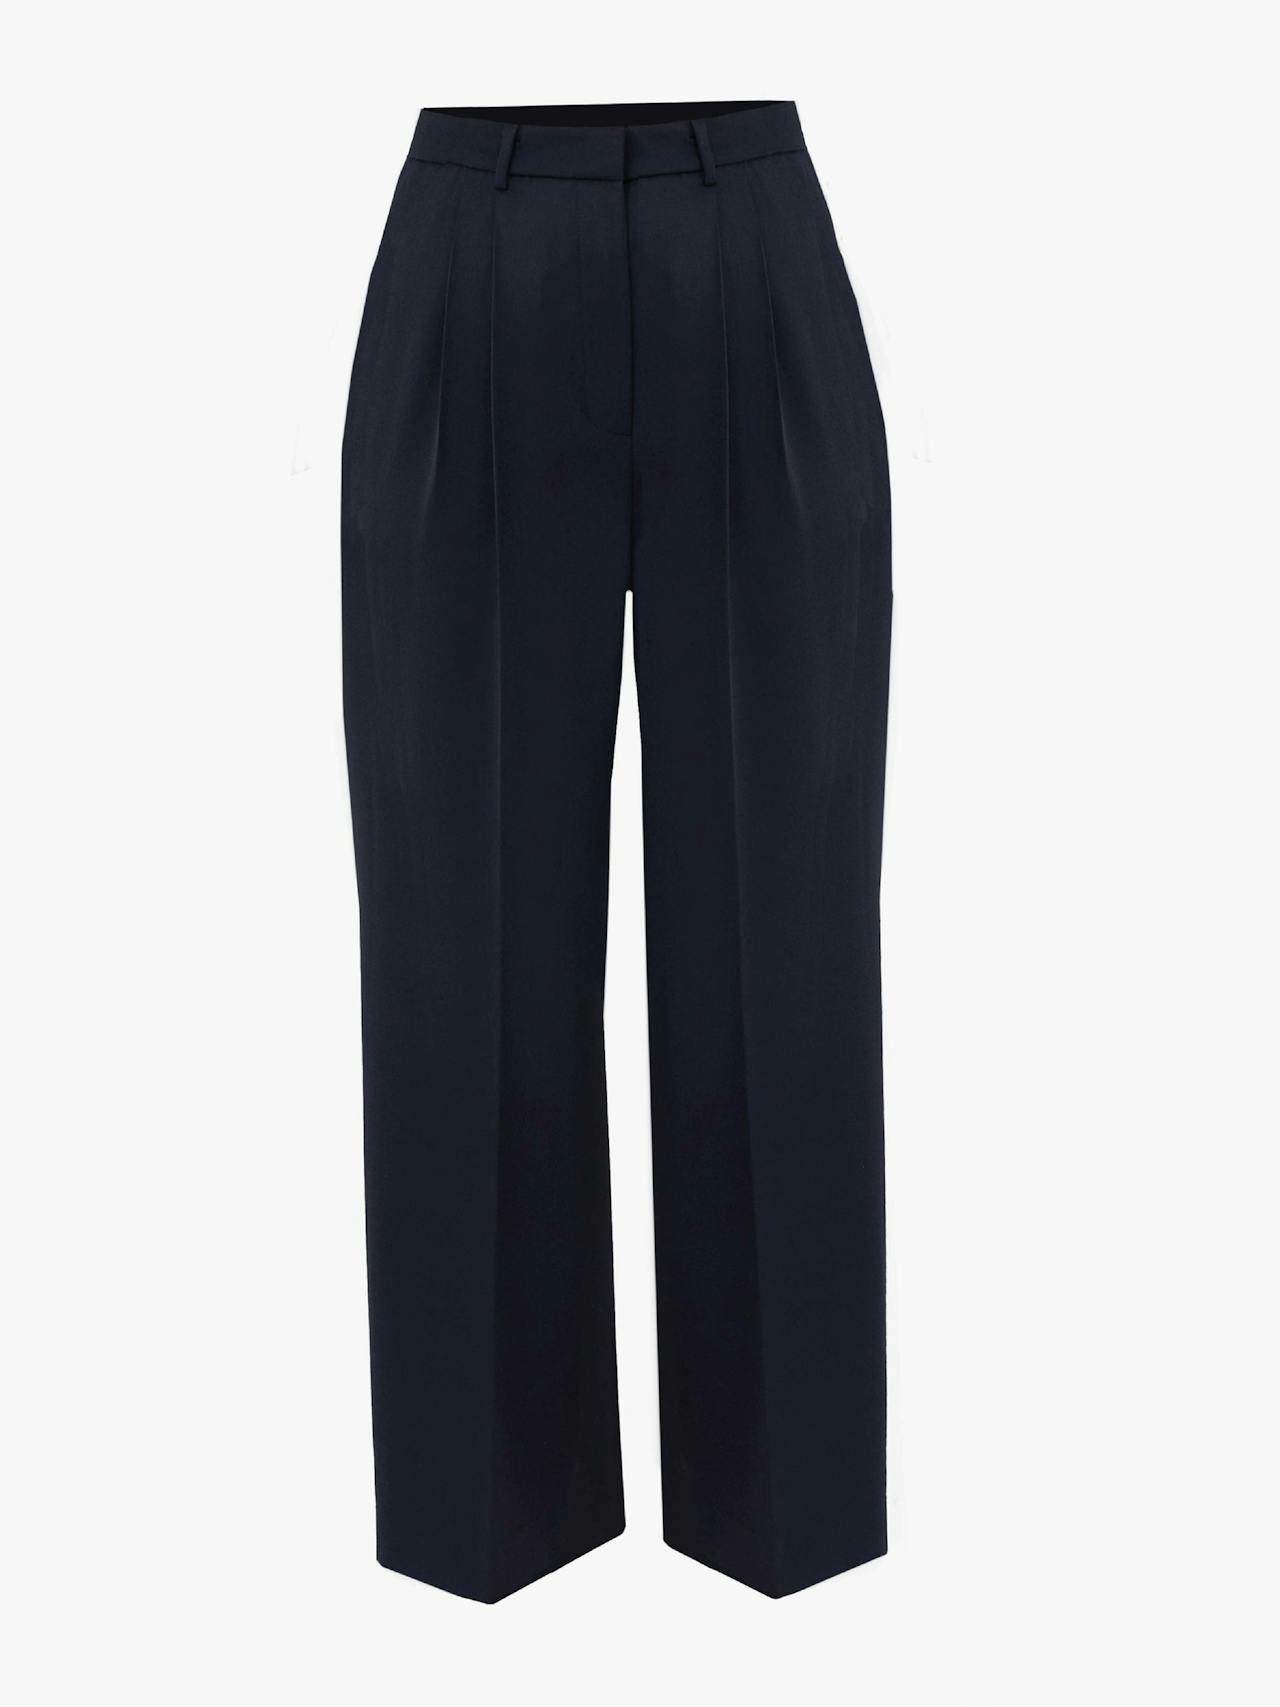 The Stanley navy blue trouser by Issue Twelve sits high on the waist with two pleats running down the full long leg. Perfect for Autumn Winter. Collagerie.com